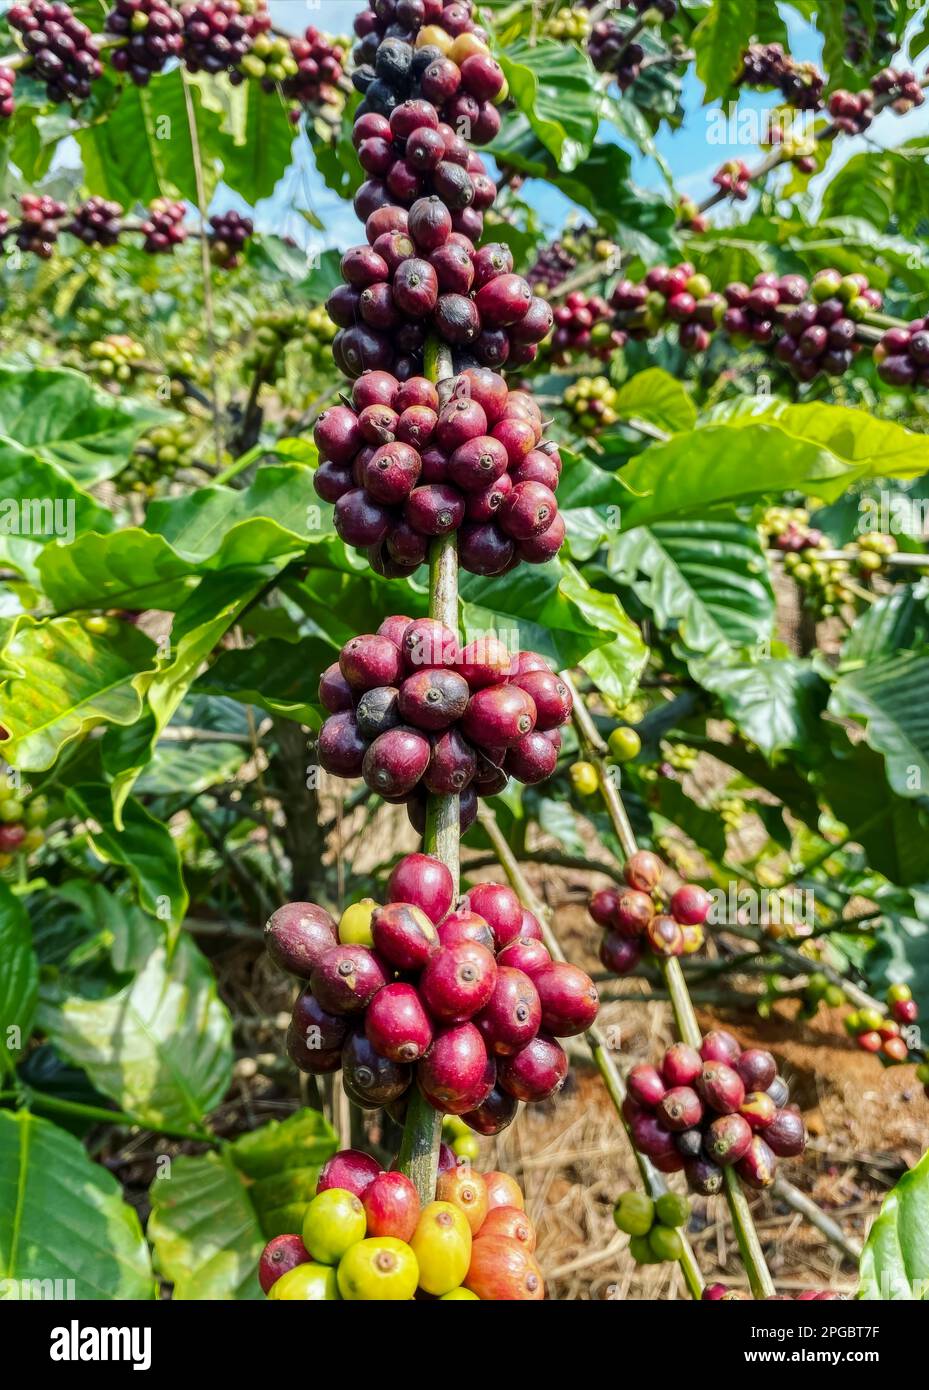 Coffee  Grow, Harvest and Use Coffee with Lifestyle Home Garden